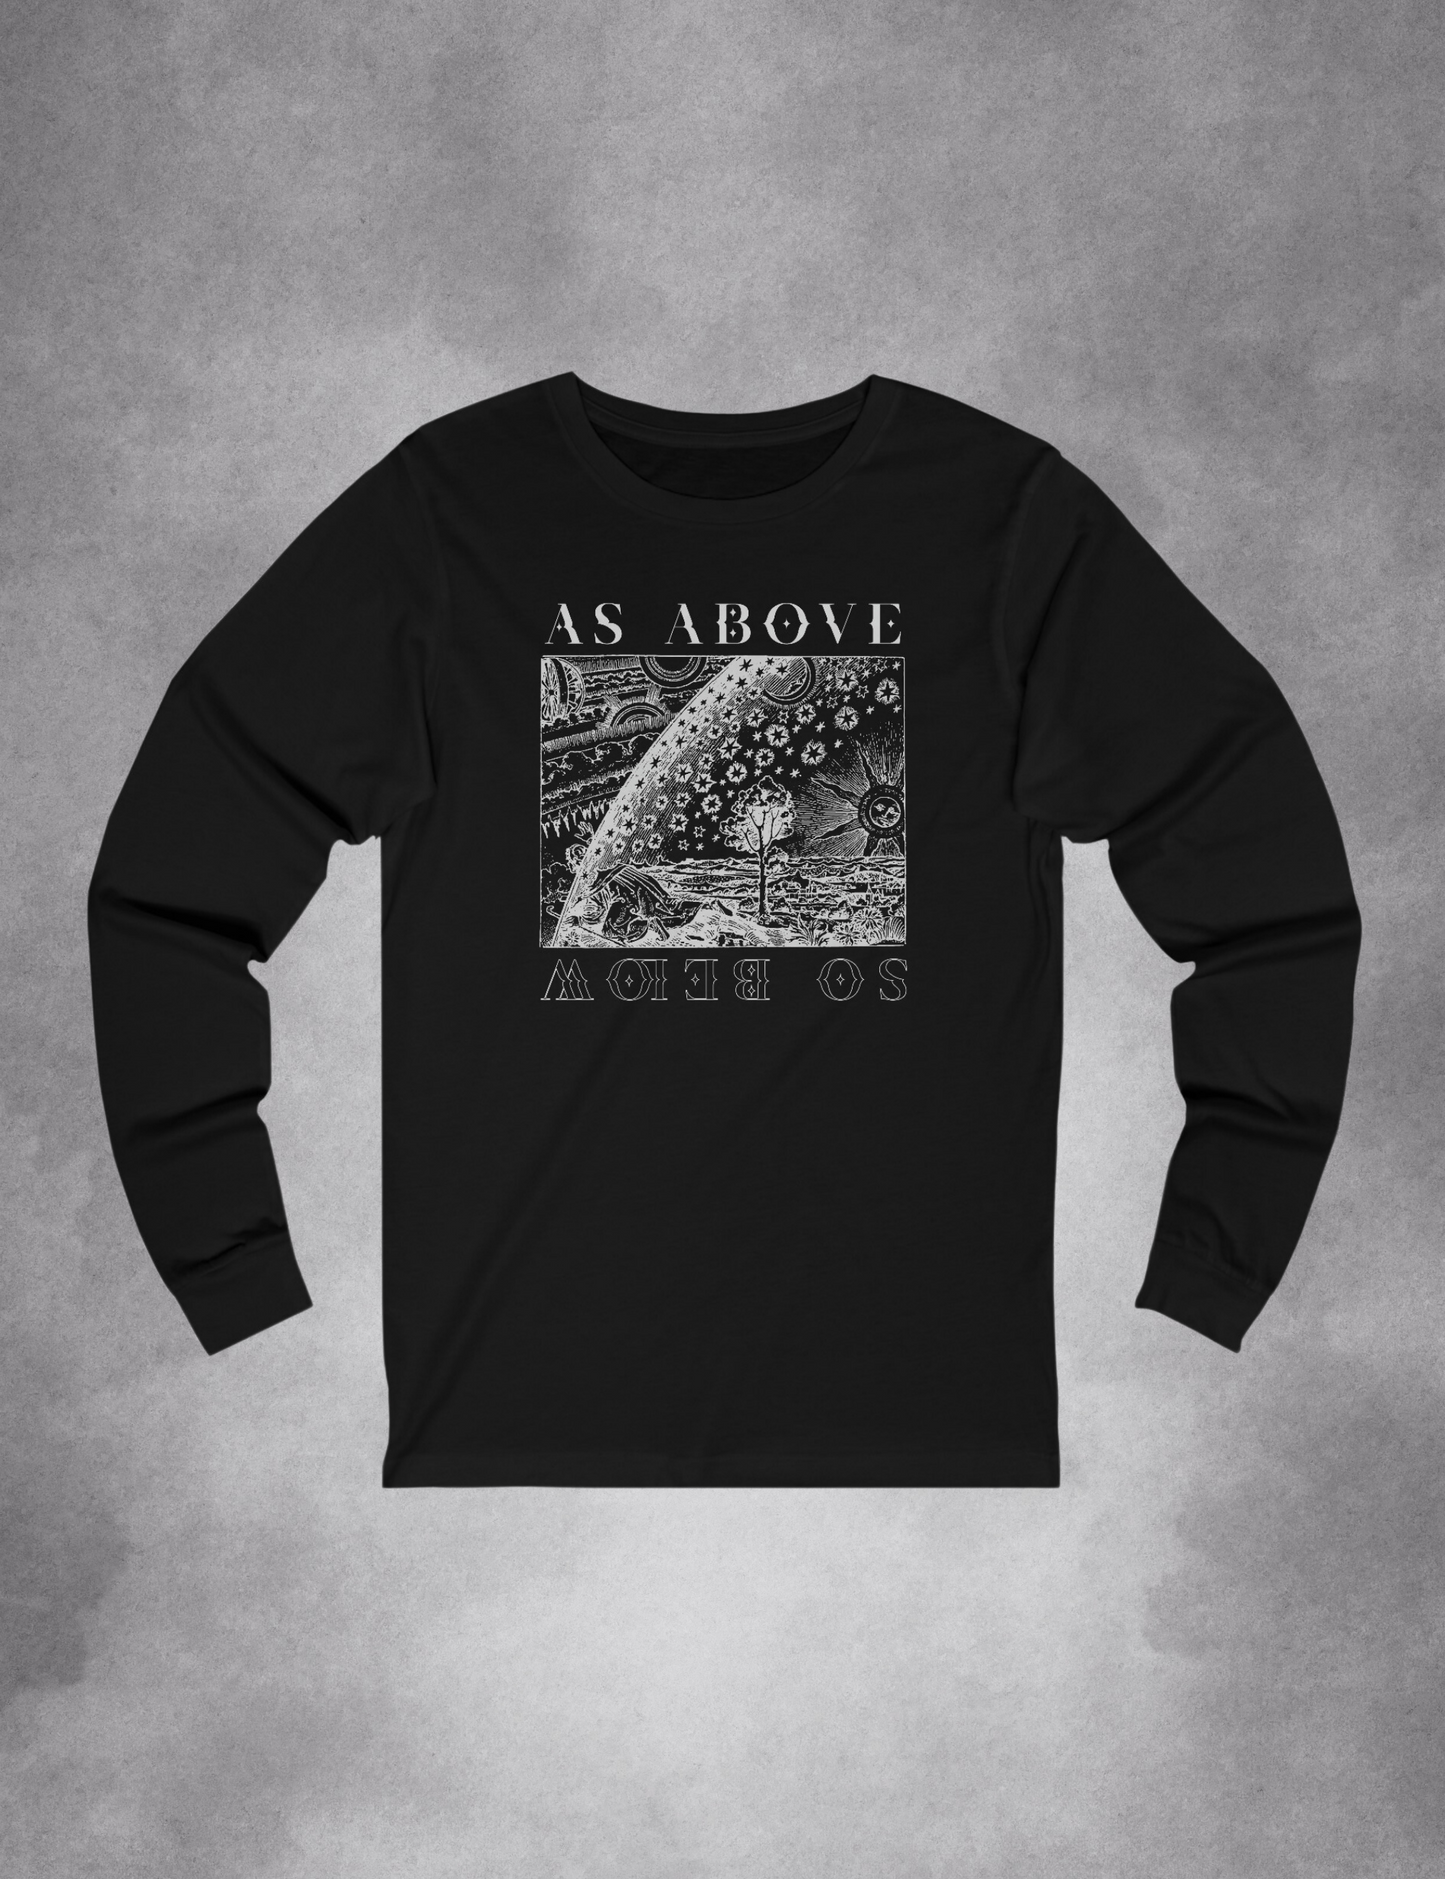 As Above So Below Occult Plus Size Goth Womens Long Sleeve Shirt